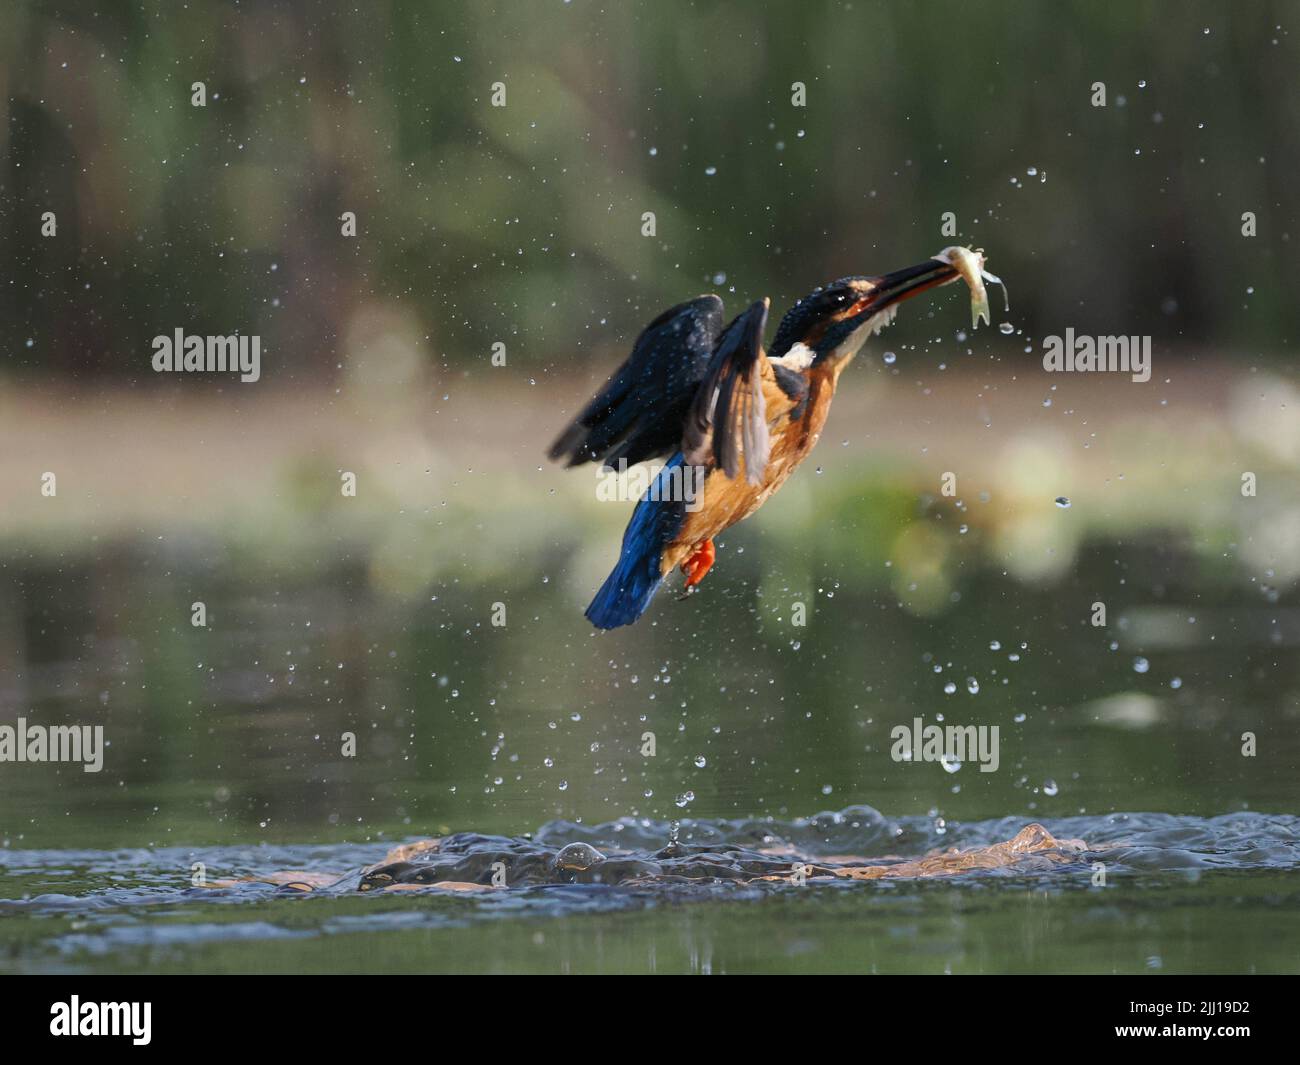 The kingfisher with its catch. UK: THESE BEAUTIFUL images mark a momentous occasion for this blind photographer as he finally achieves his dream show, Stock Photo